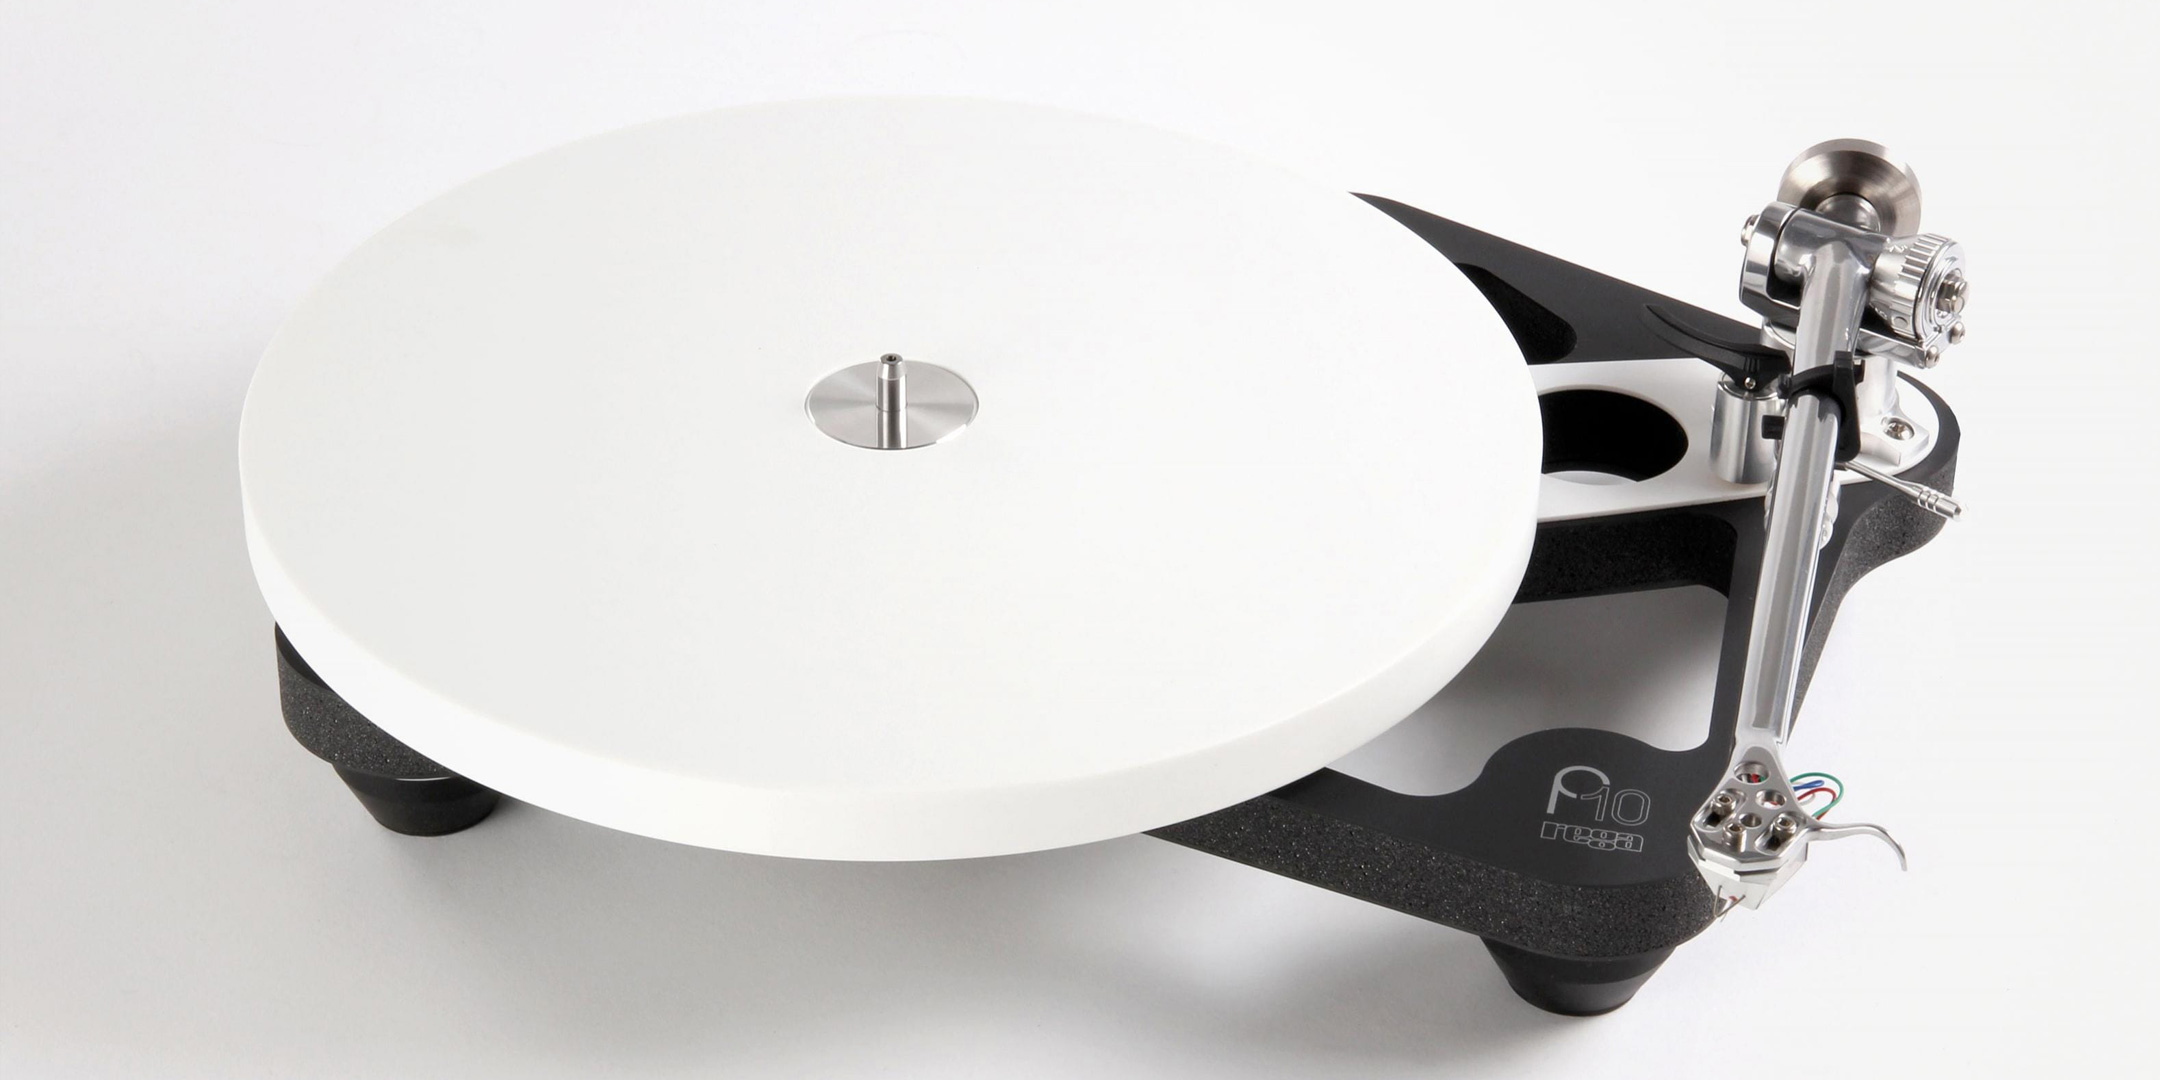 Pic of a Rega Planar 10 Turntable from the tone arm side